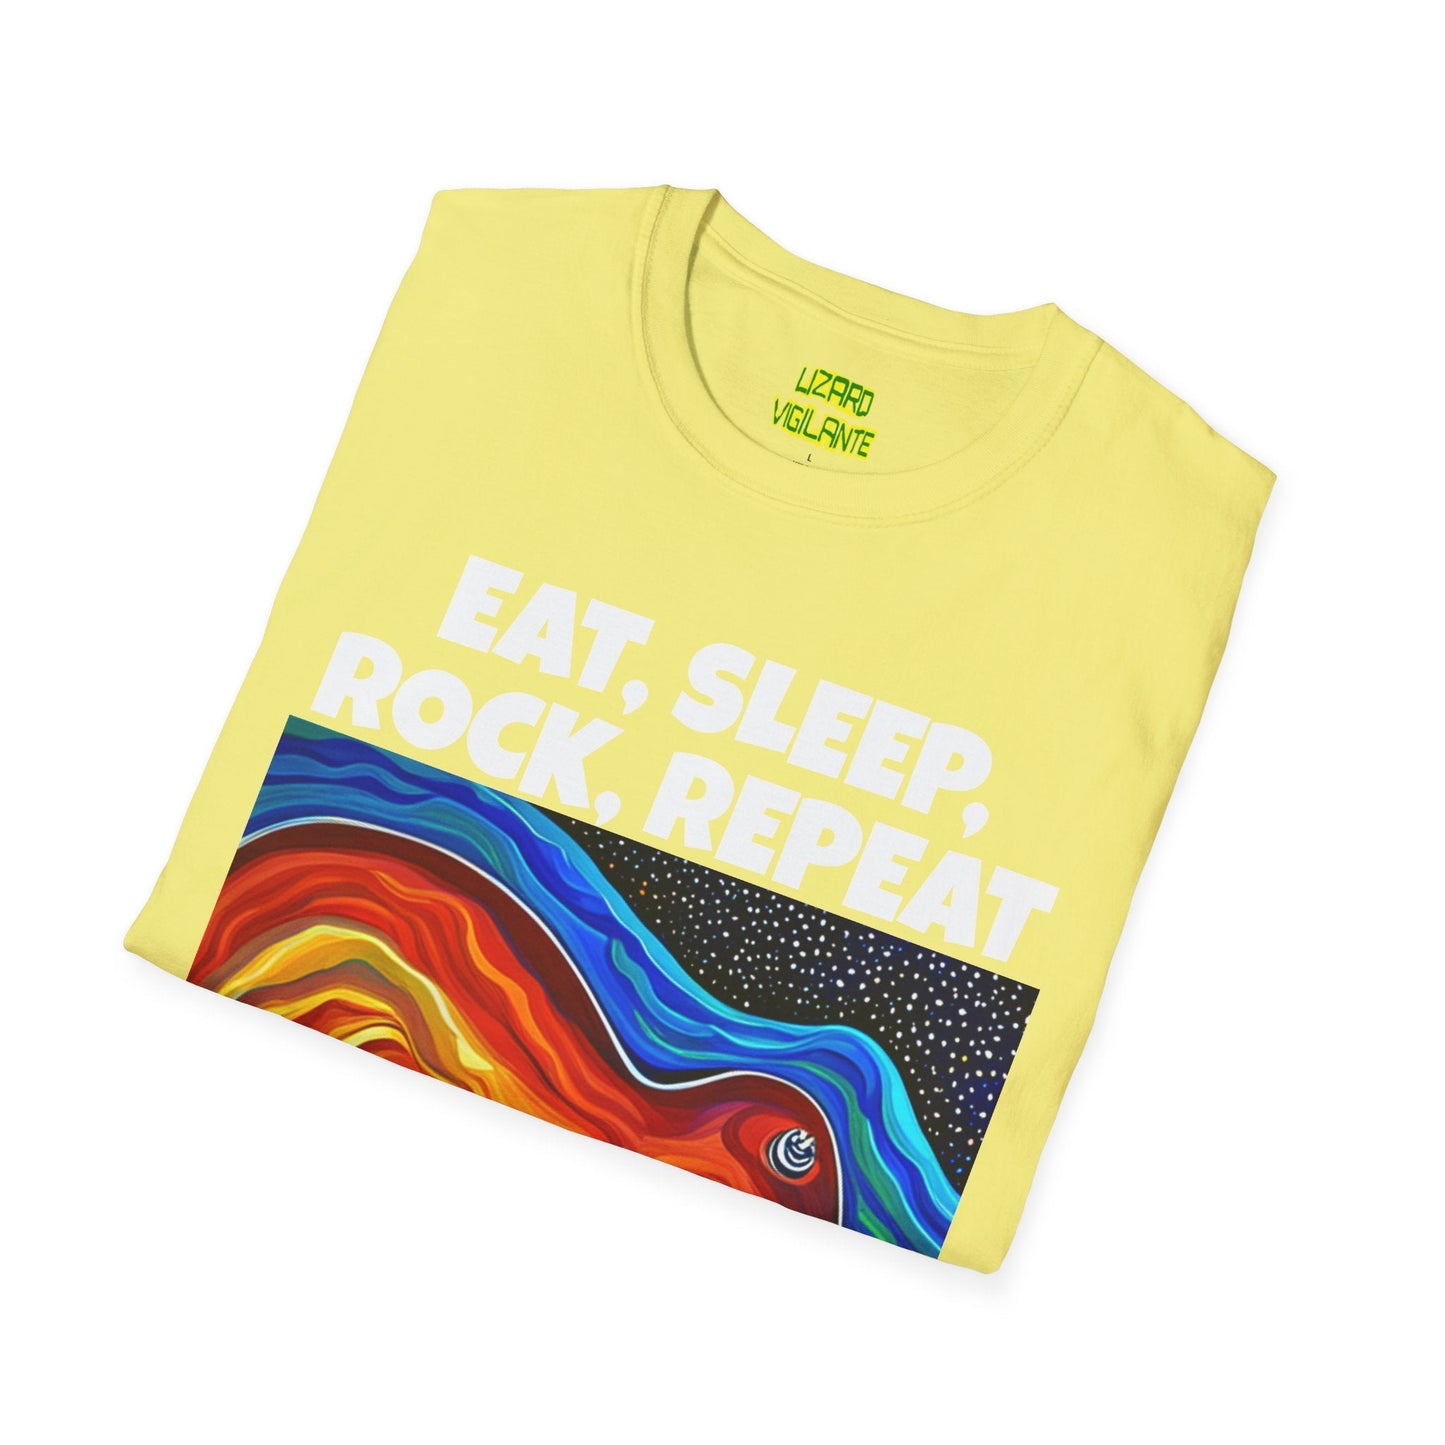 Eat, Sleep, Rock, Repeat with Cool Guitar Graphic Unisex Softstyle T-Shirt - Lizard Vigilante